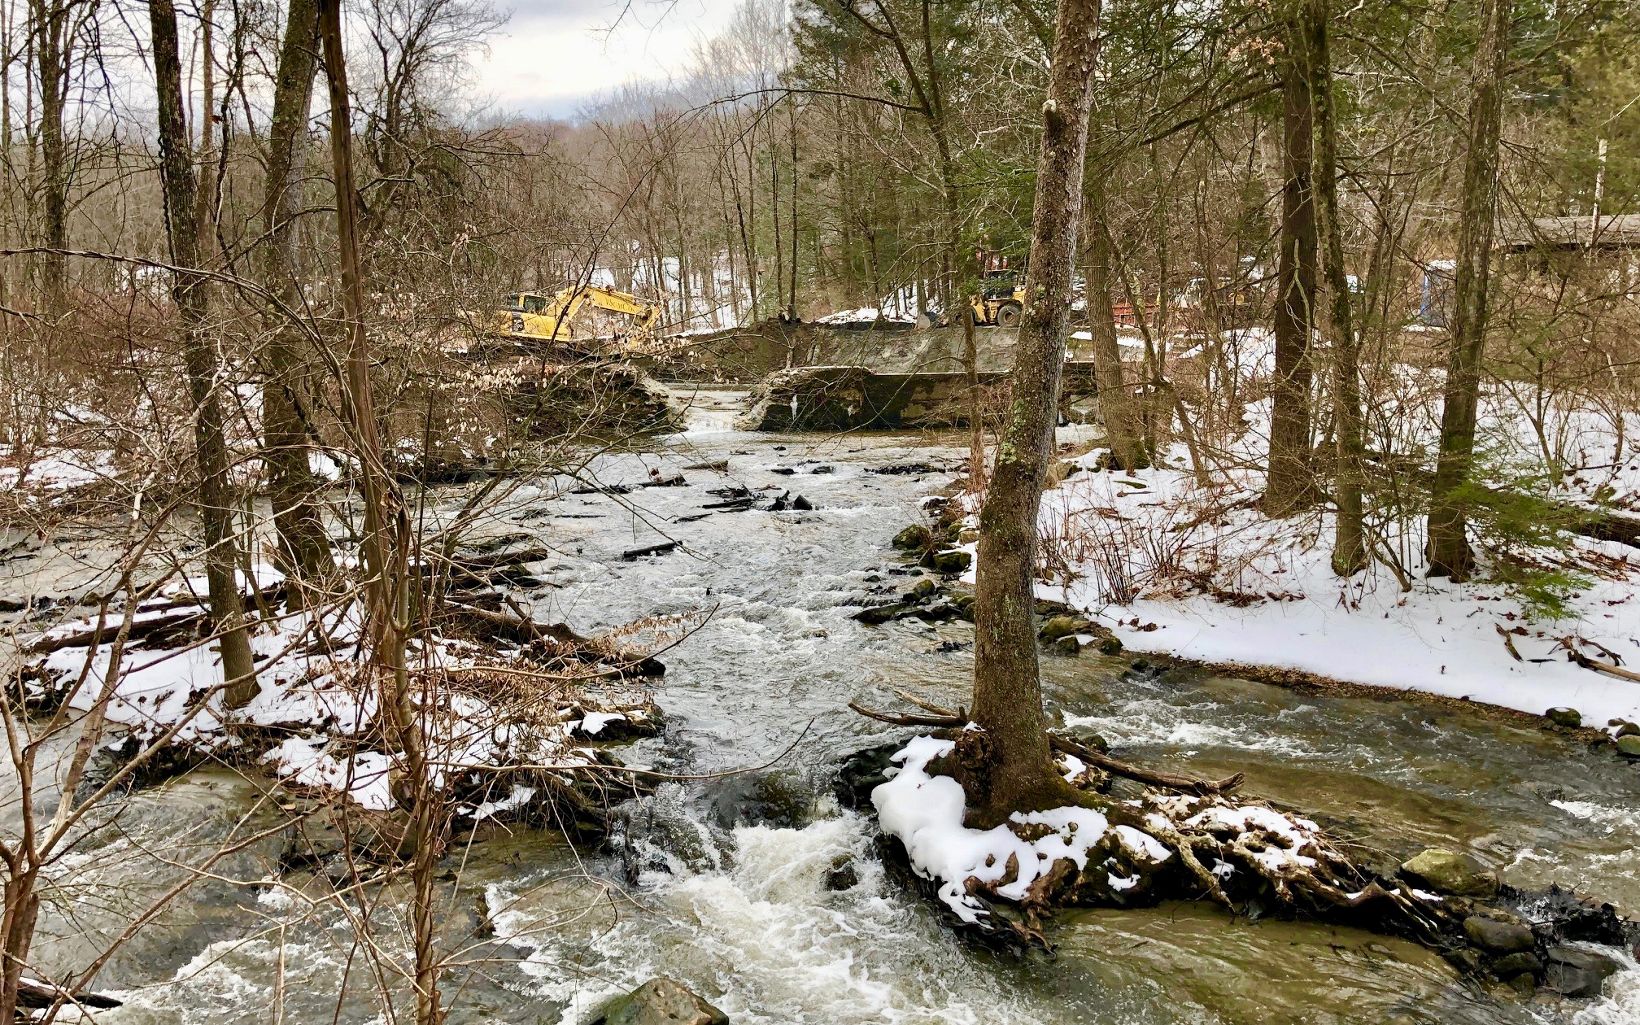 
                
                  Demolition Begins Removal of the Old Papermill Dam begins. 
                  © Sally Harold/The Nature Conservancy
                
              